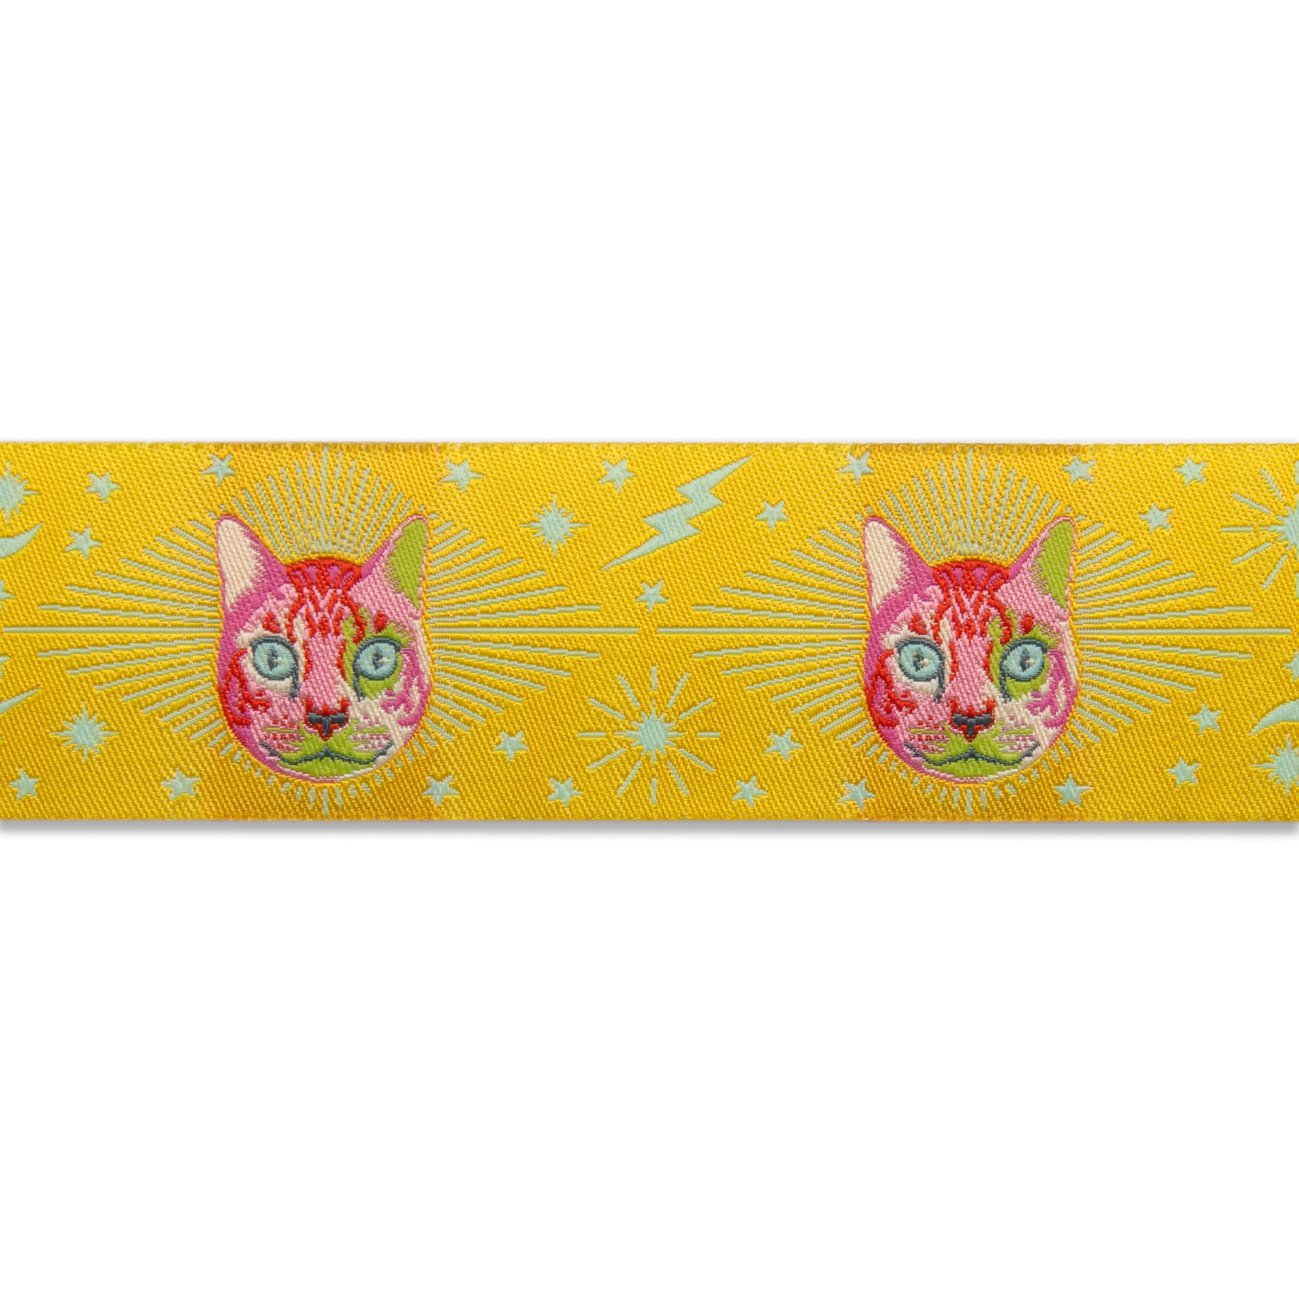 Cheshire Cat in Yellow Ribbon 1 1-2in Tula Pink | Curiouser & Curiouser | TK-75/38mm col 2 | Sold by the Yard